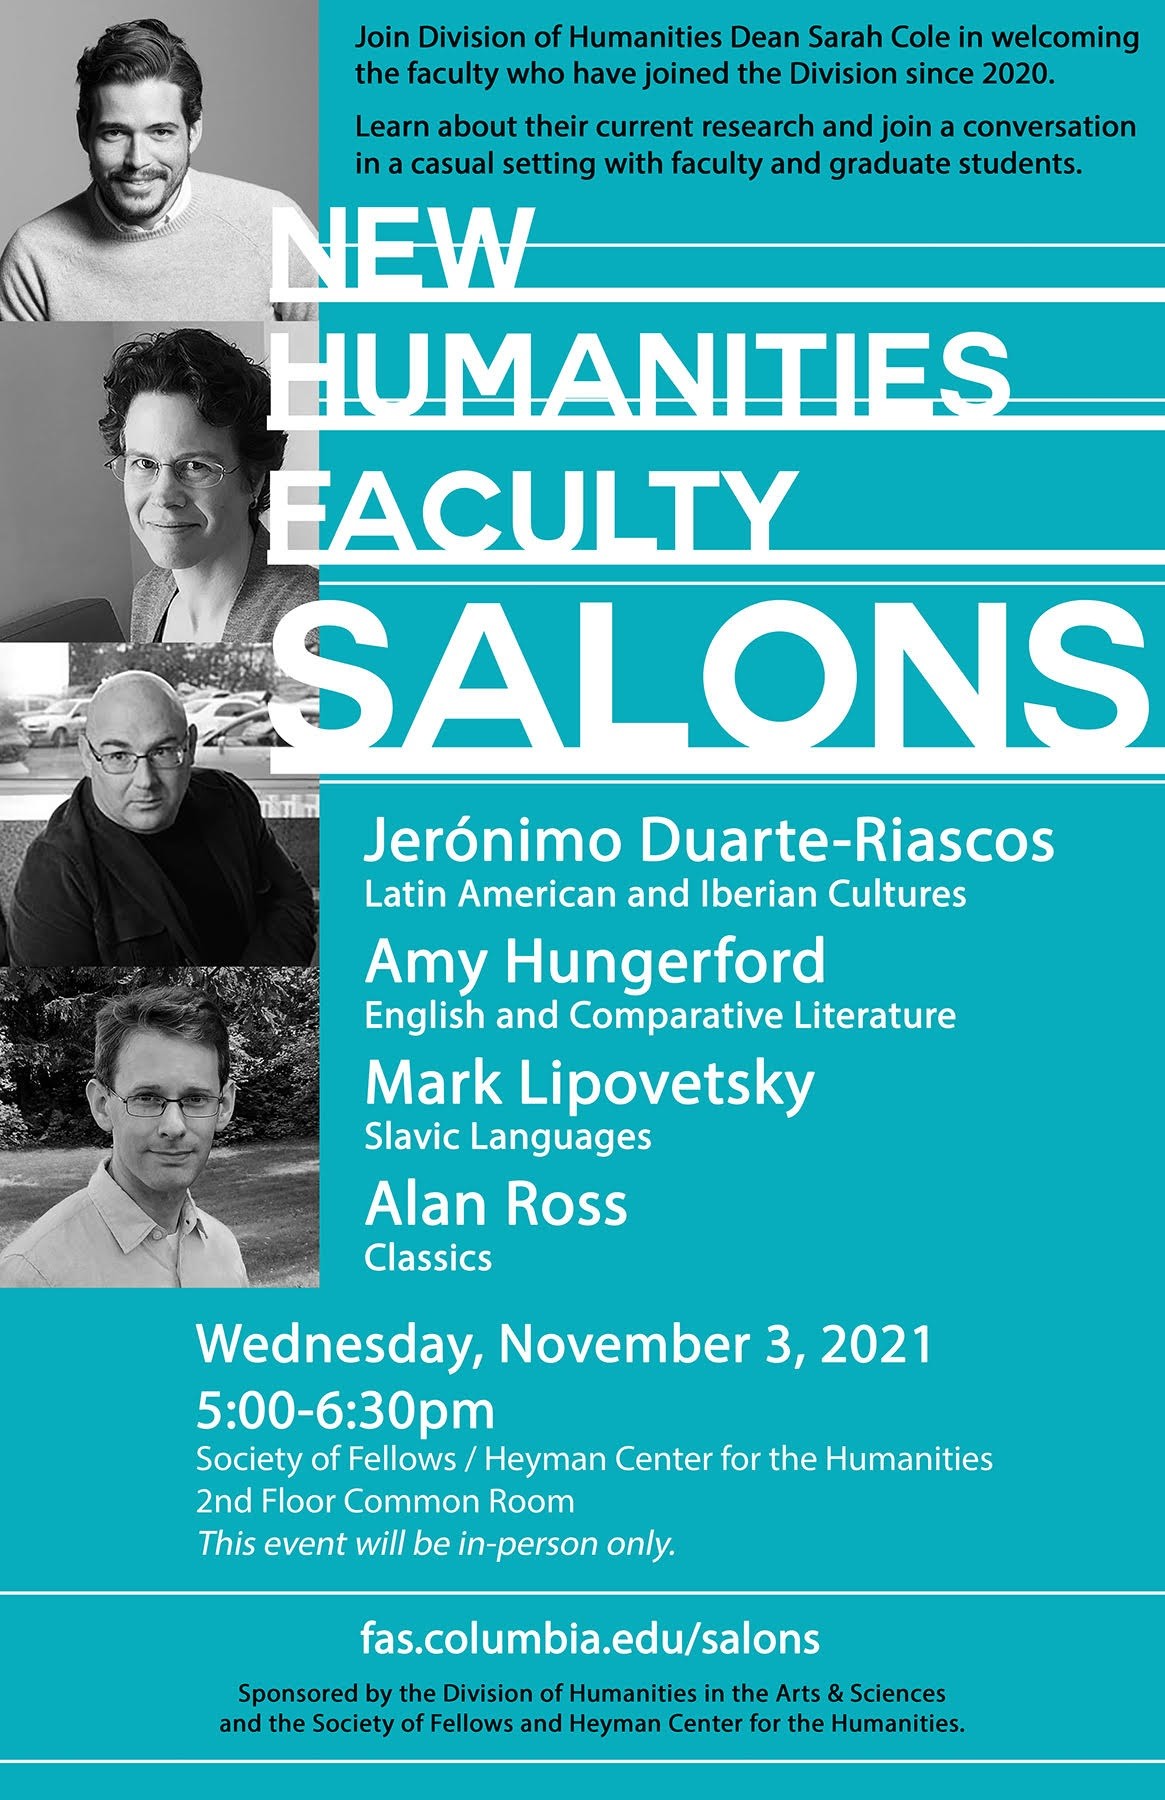 New Humanities Faculty Salons